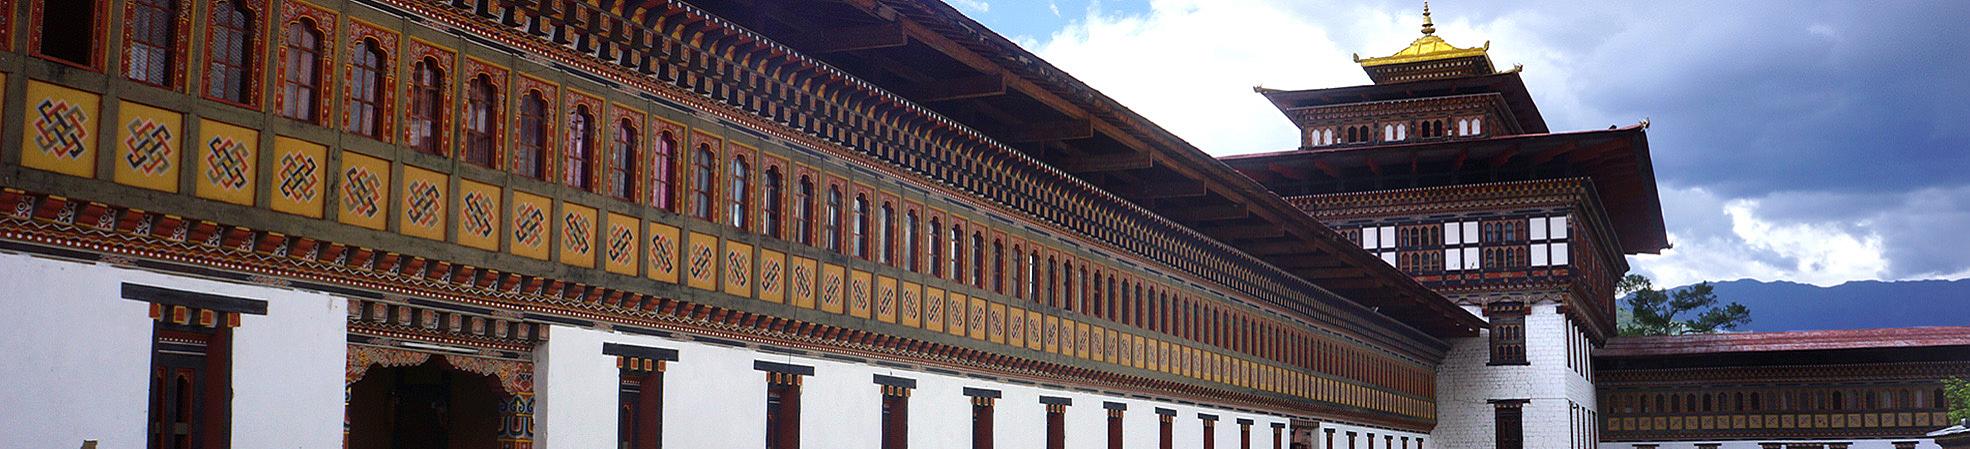 How to Take a Wellness Vacation in Bhutan